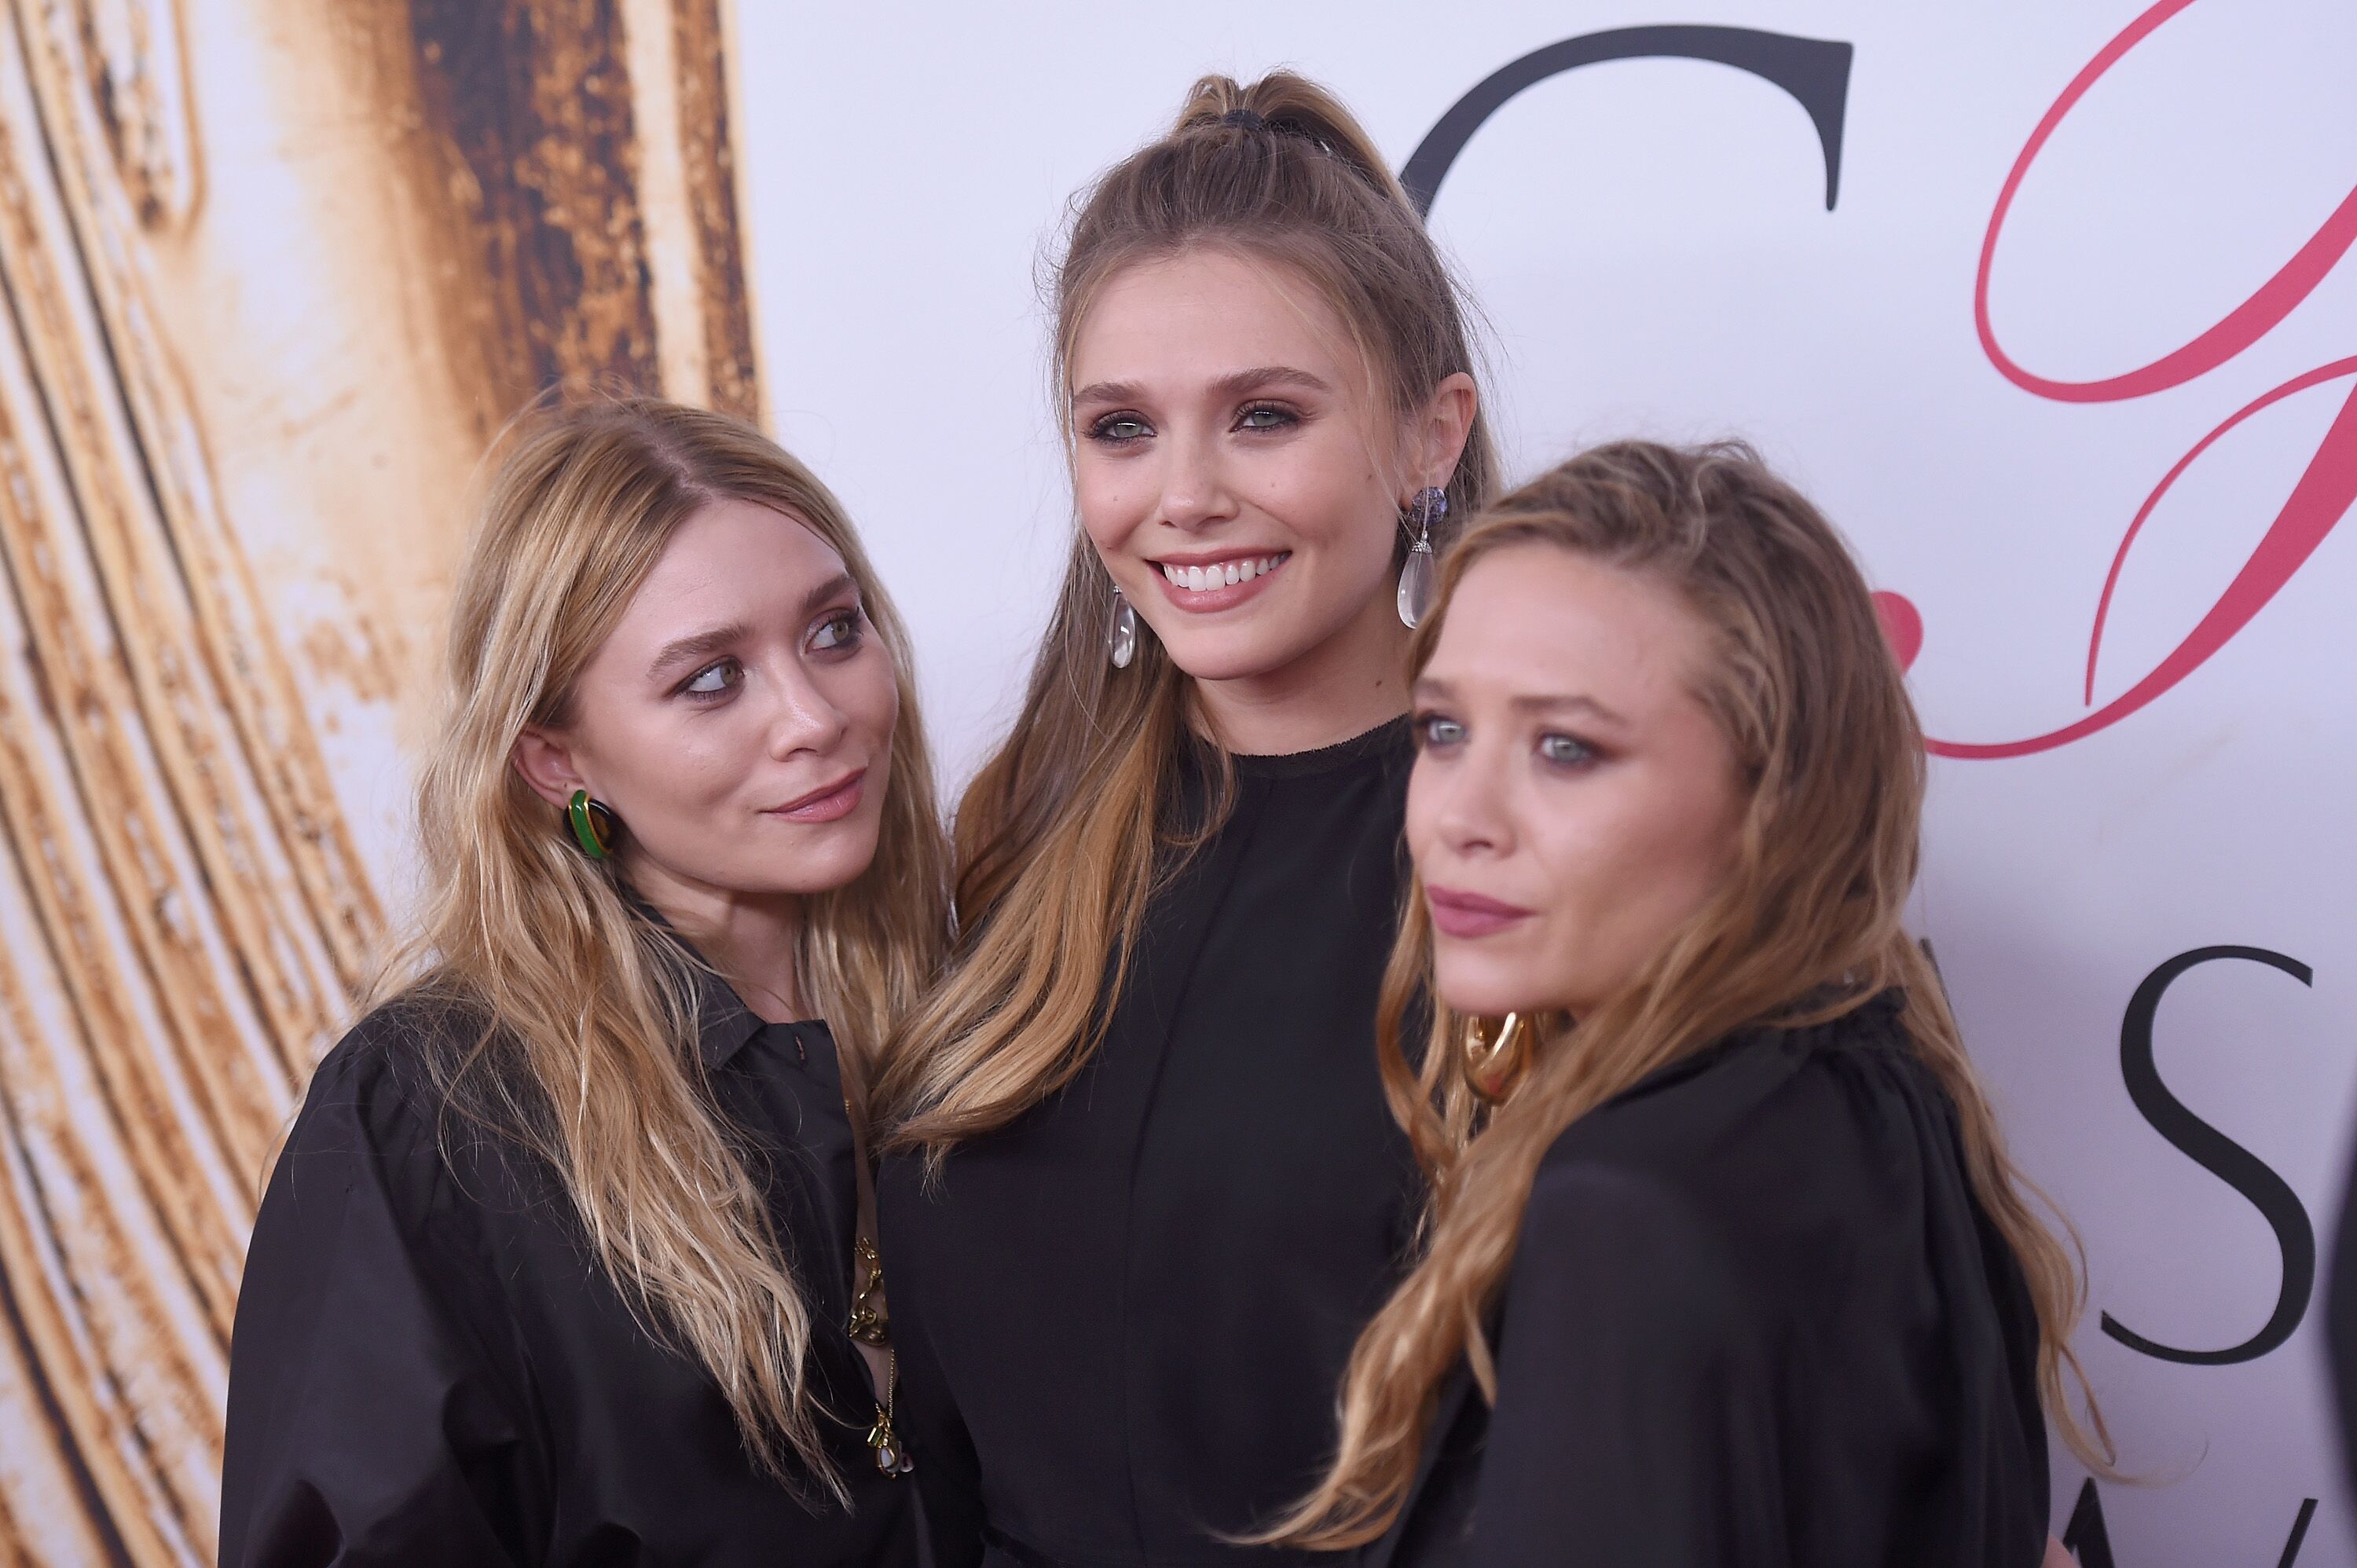 Elizabeth, Mary-Kate and Ashley Olsen at the 2016 CFDA Fashion Awards in New York. | Photo: Getty Images